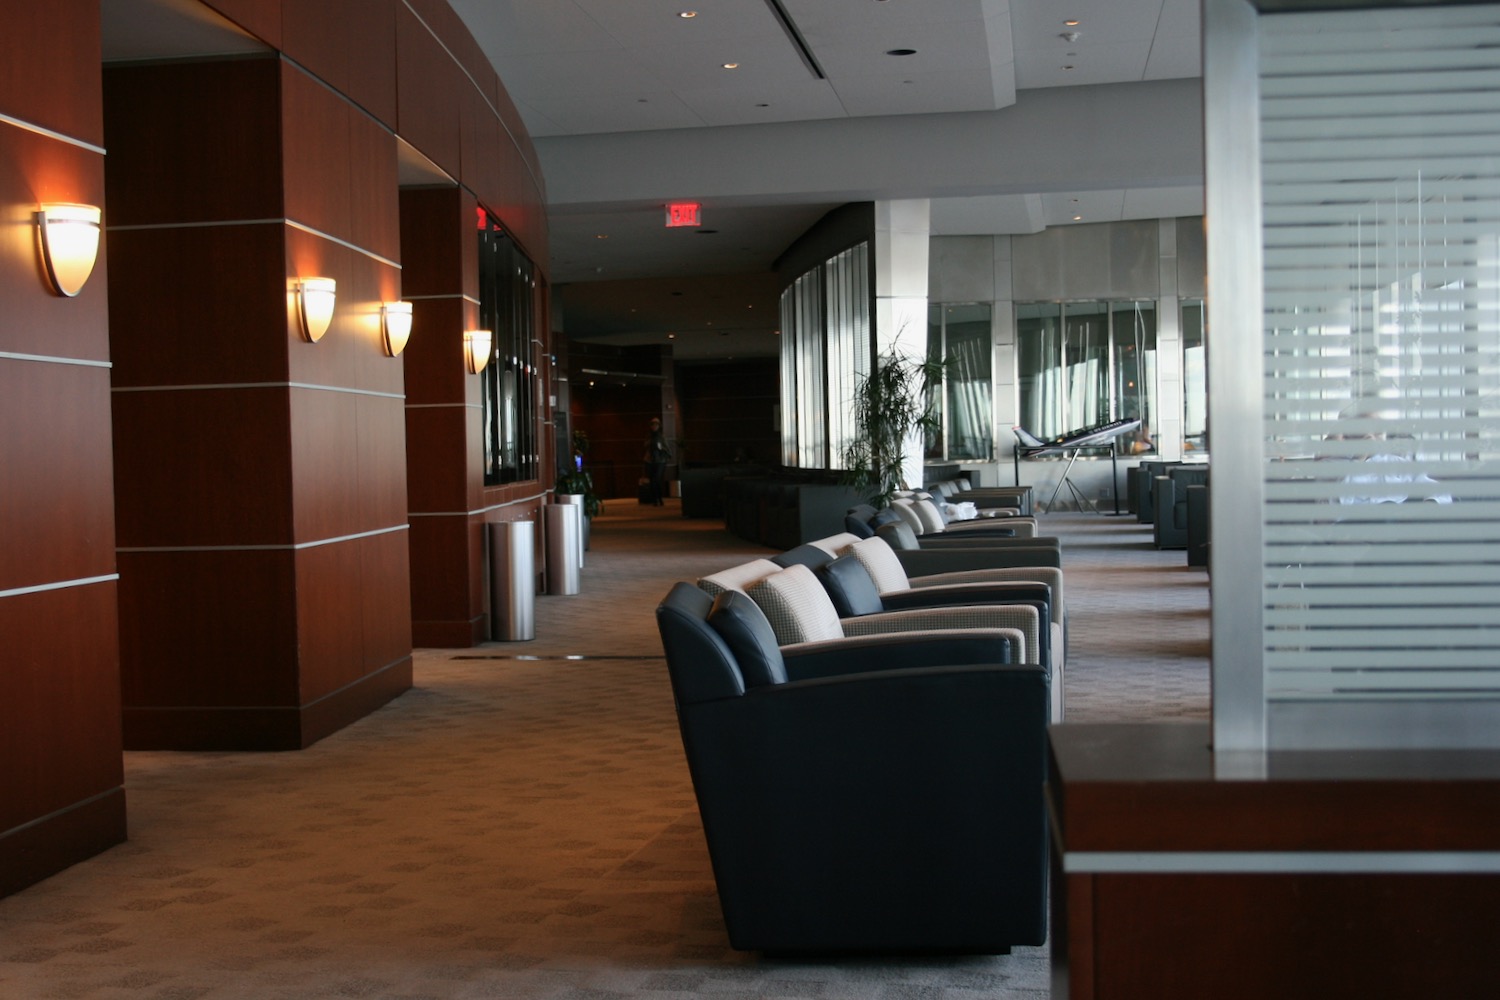 a row of chairs in a lobby